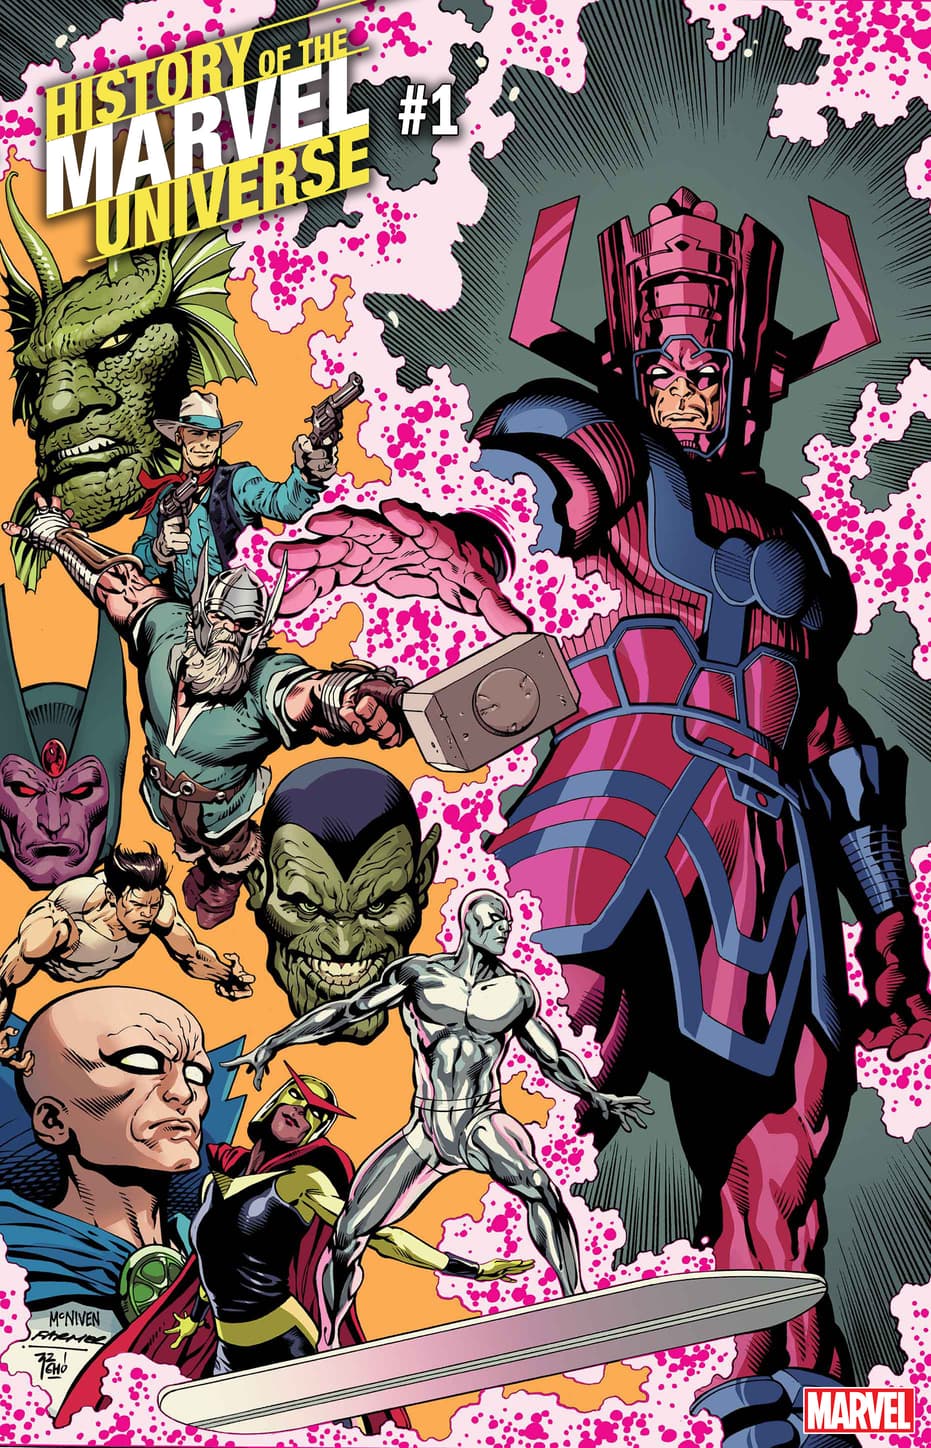 Cover of History of the Marvel Universe #1